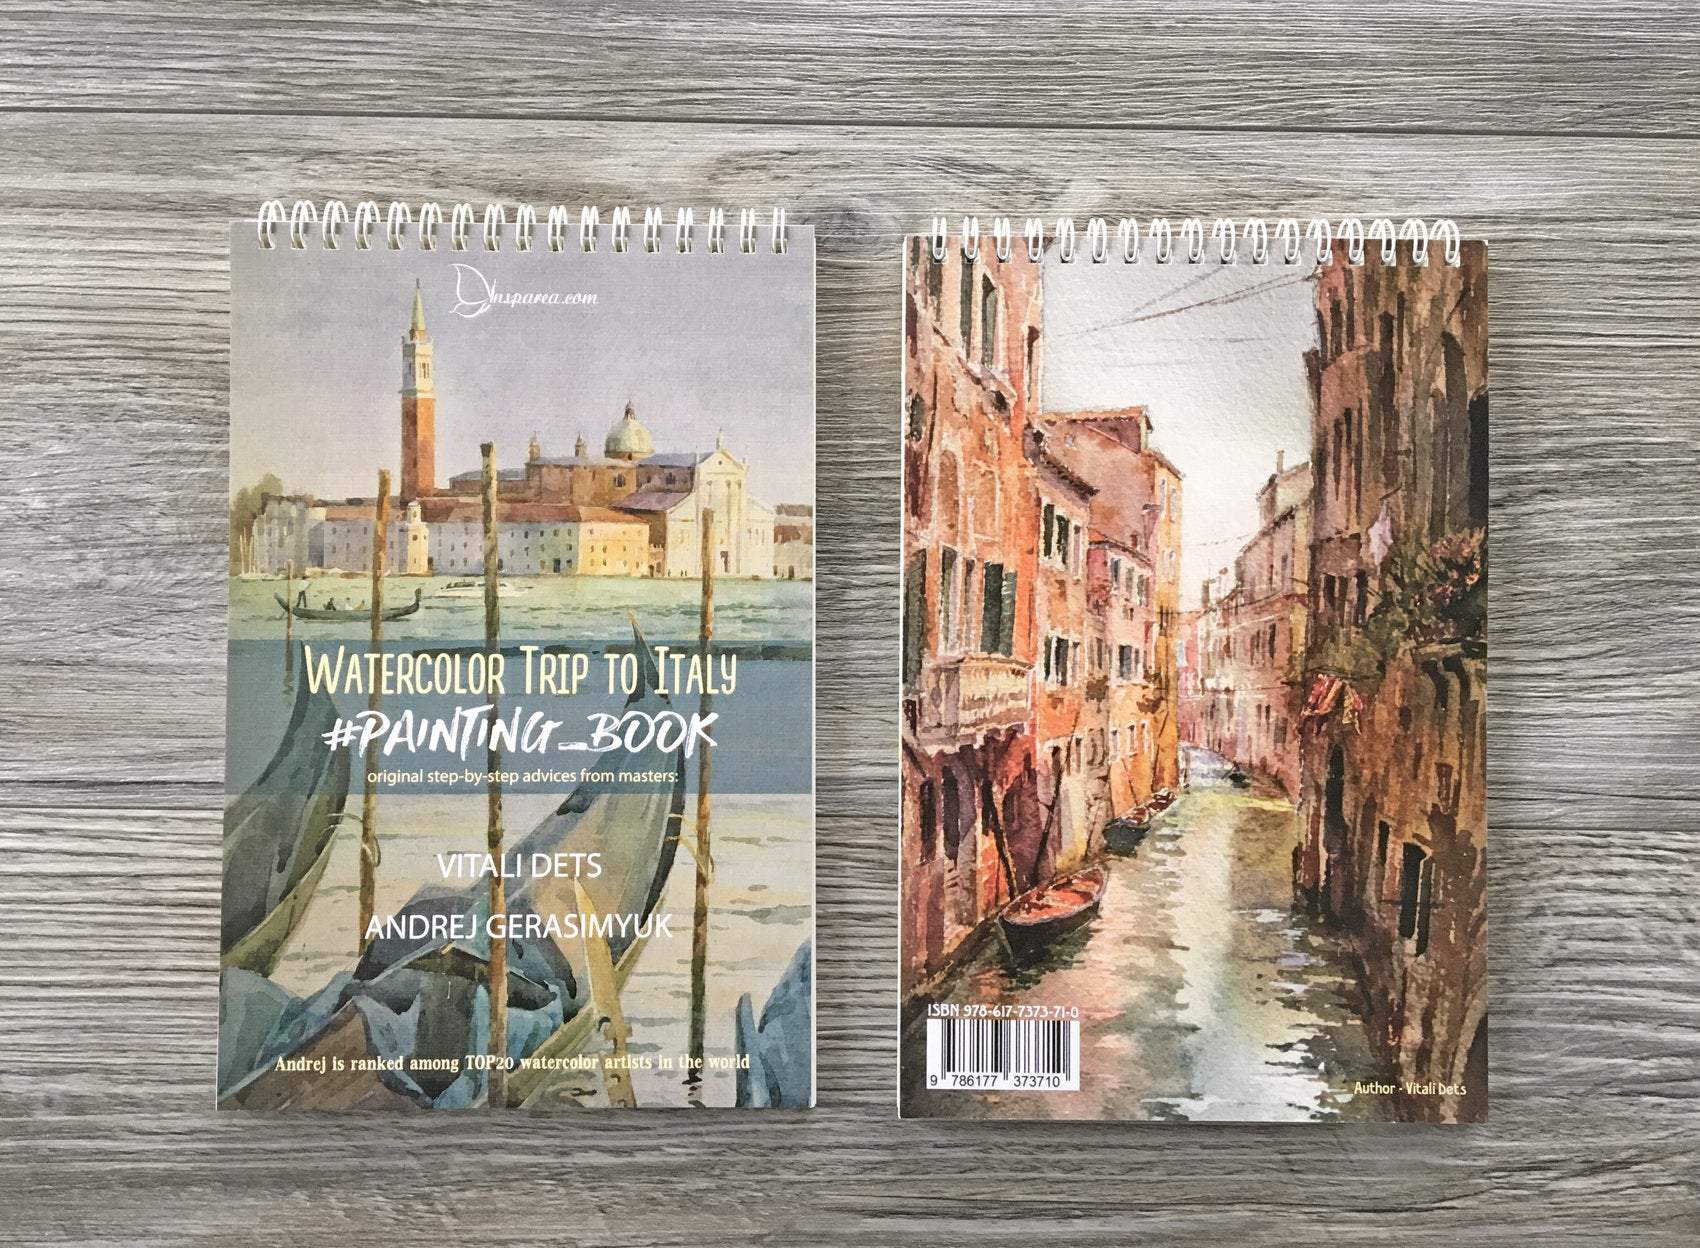 4 products (Italy, France books, Venice & PaintIN sketchbooks)